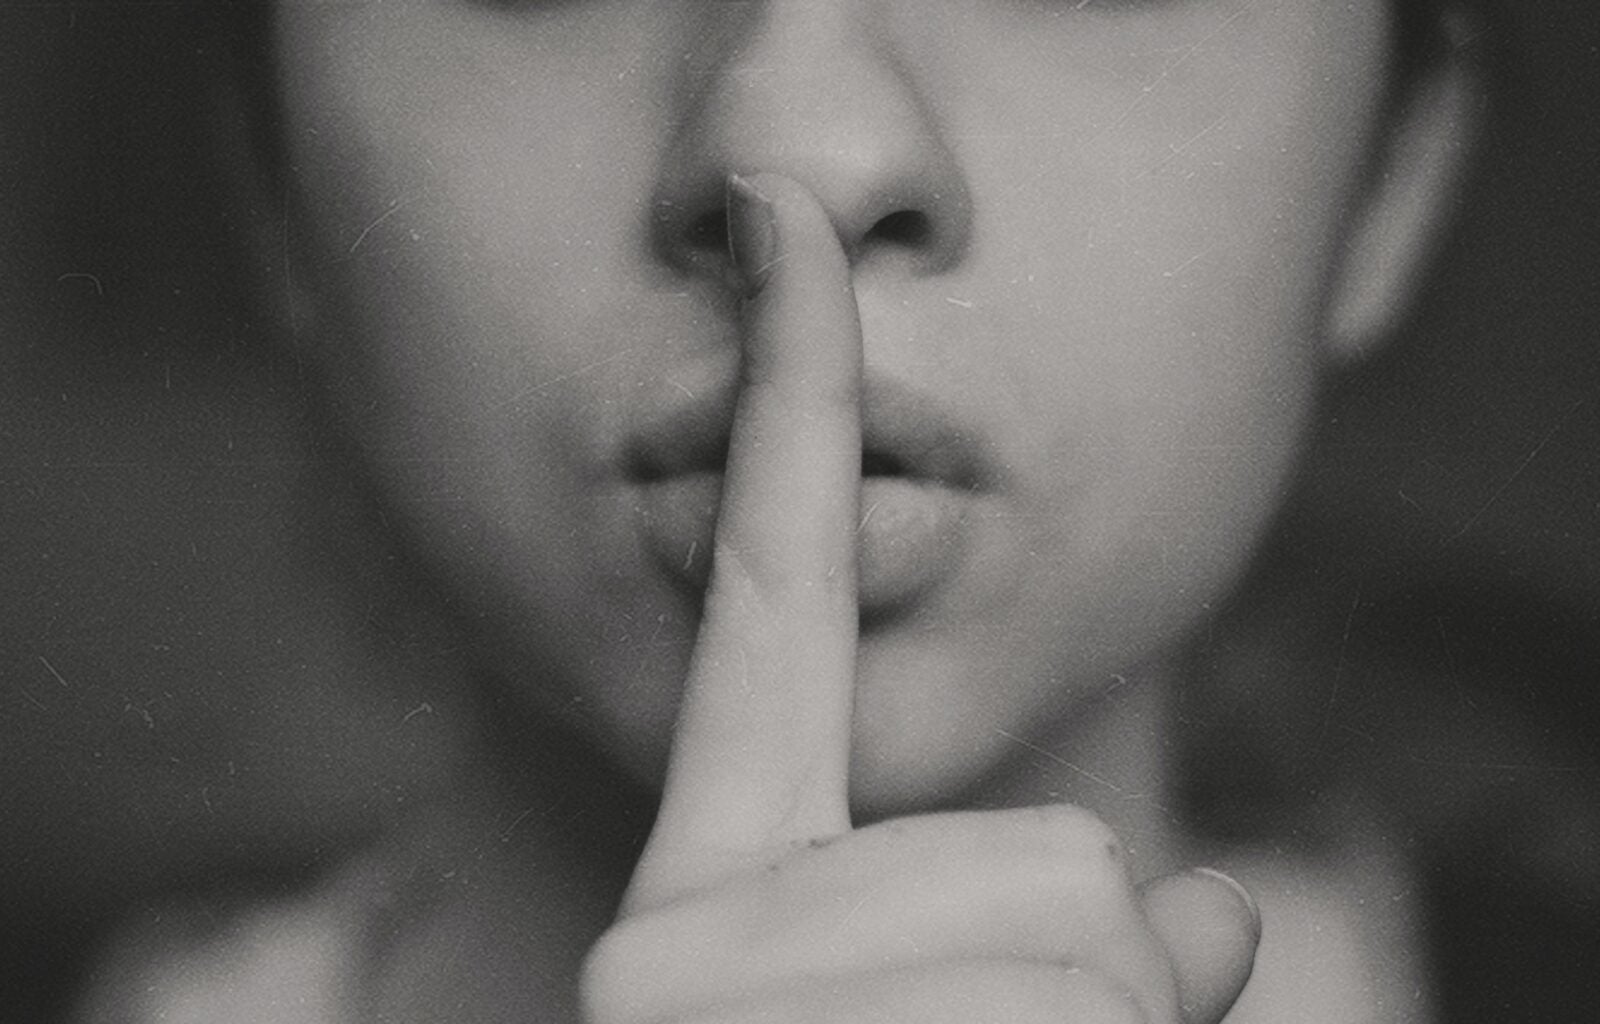 A woman with her fingers to her lips in a shushing motion.